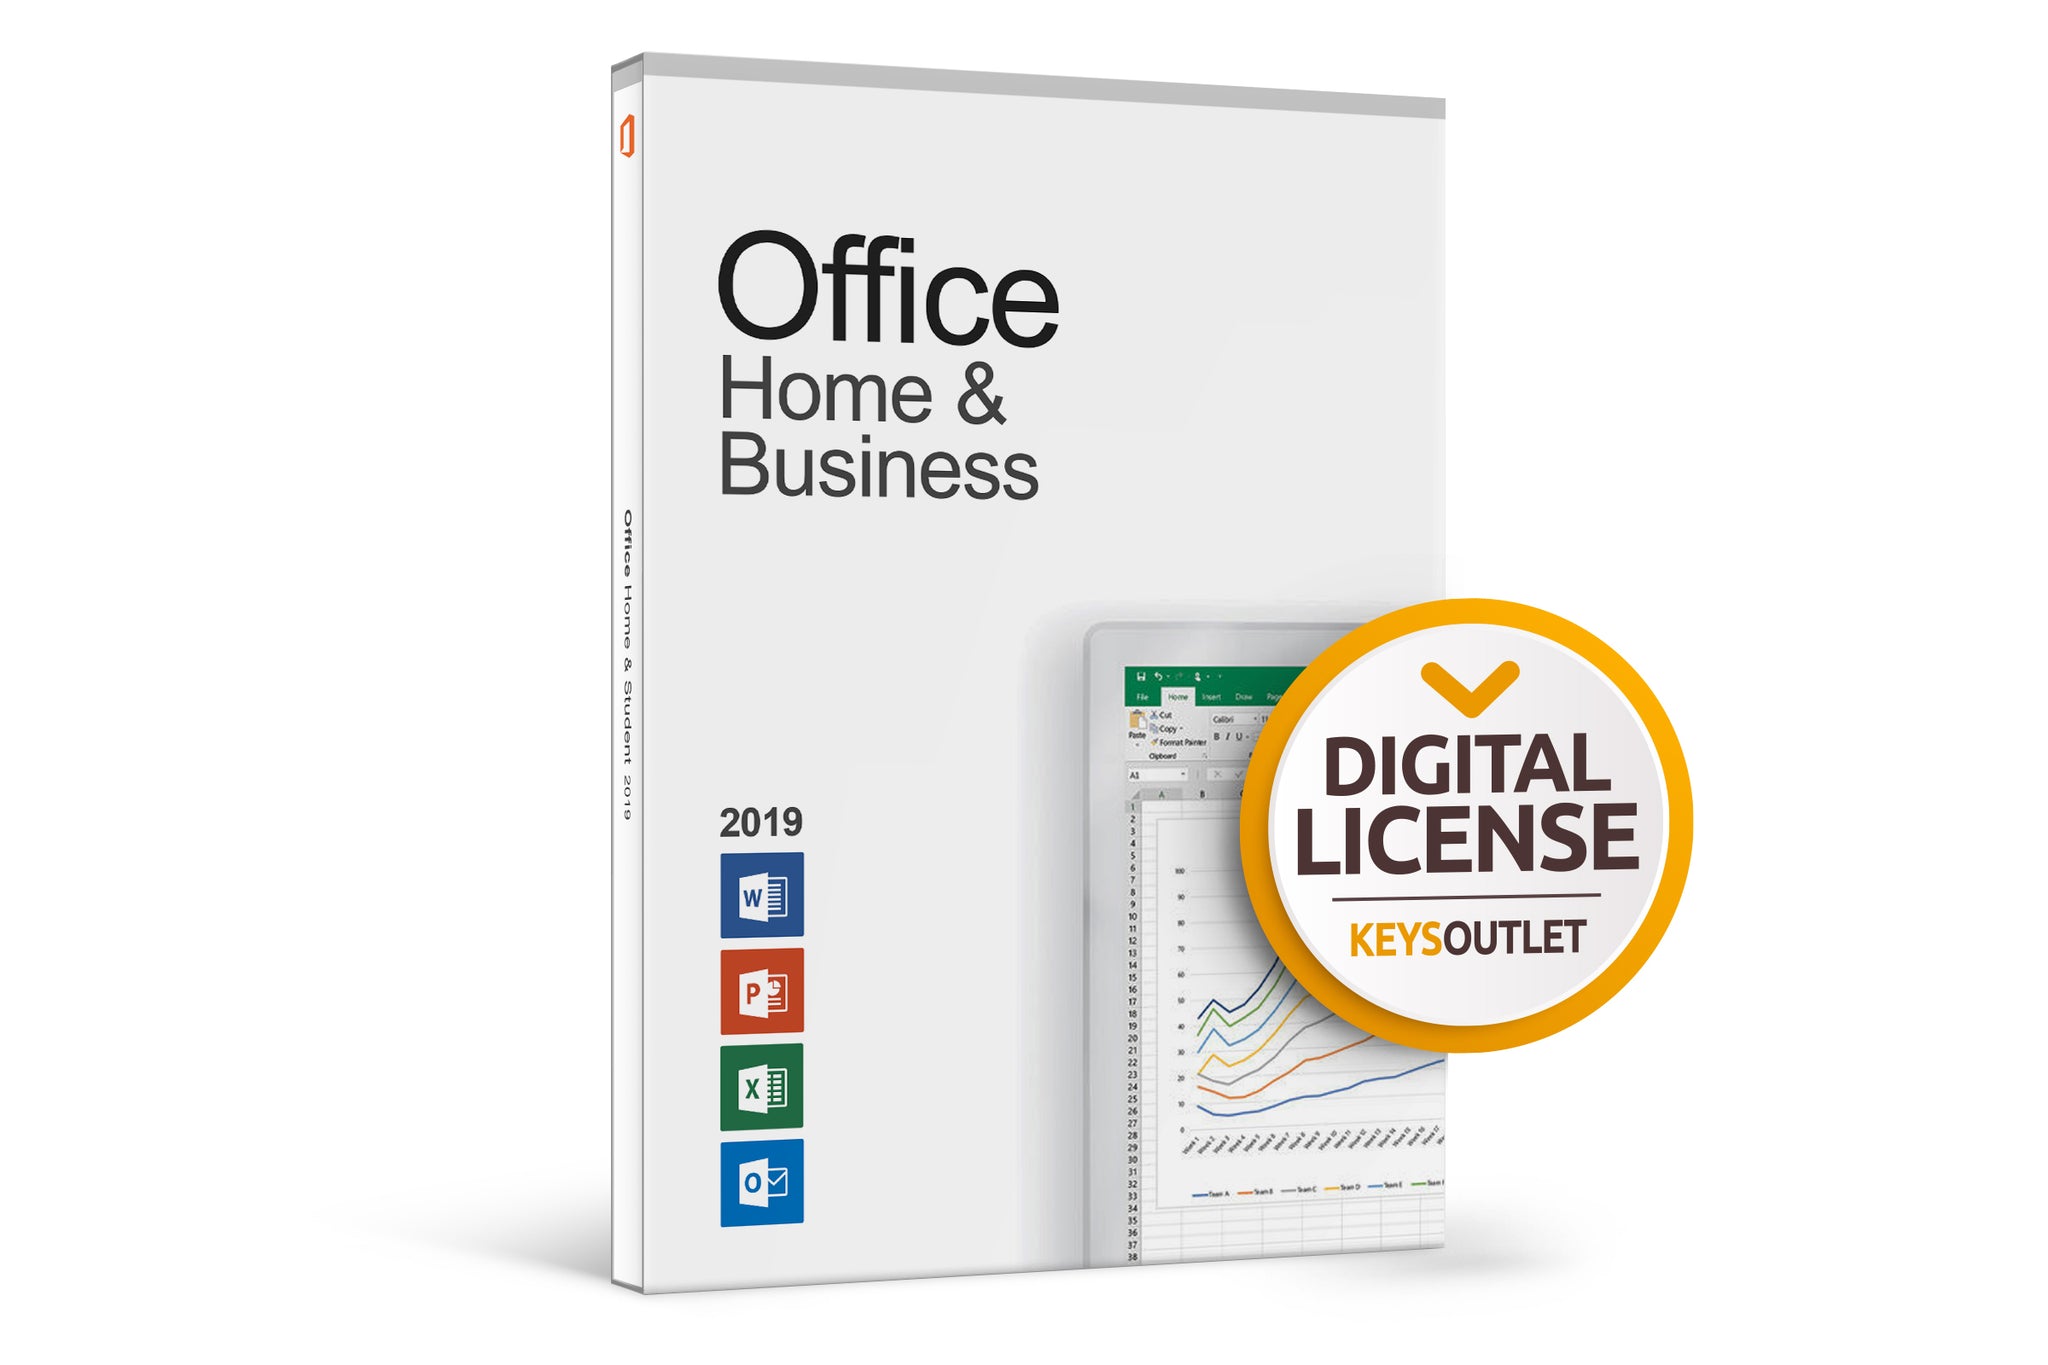 Office 2019 Home & Business Binding